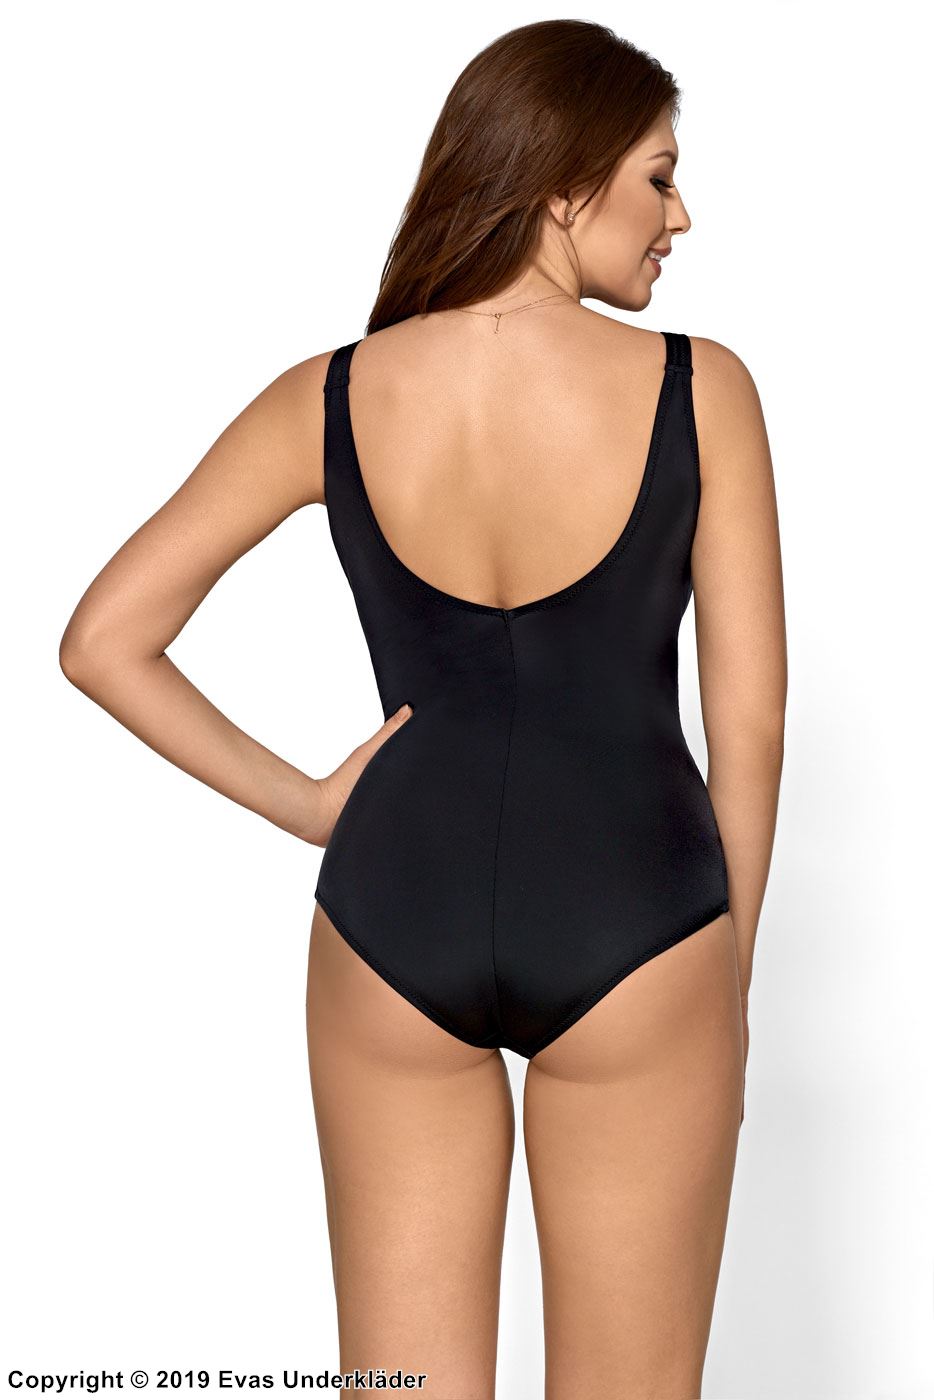 One-piece swimsuit, smooth microfiber, mesh inlay, real bra cups